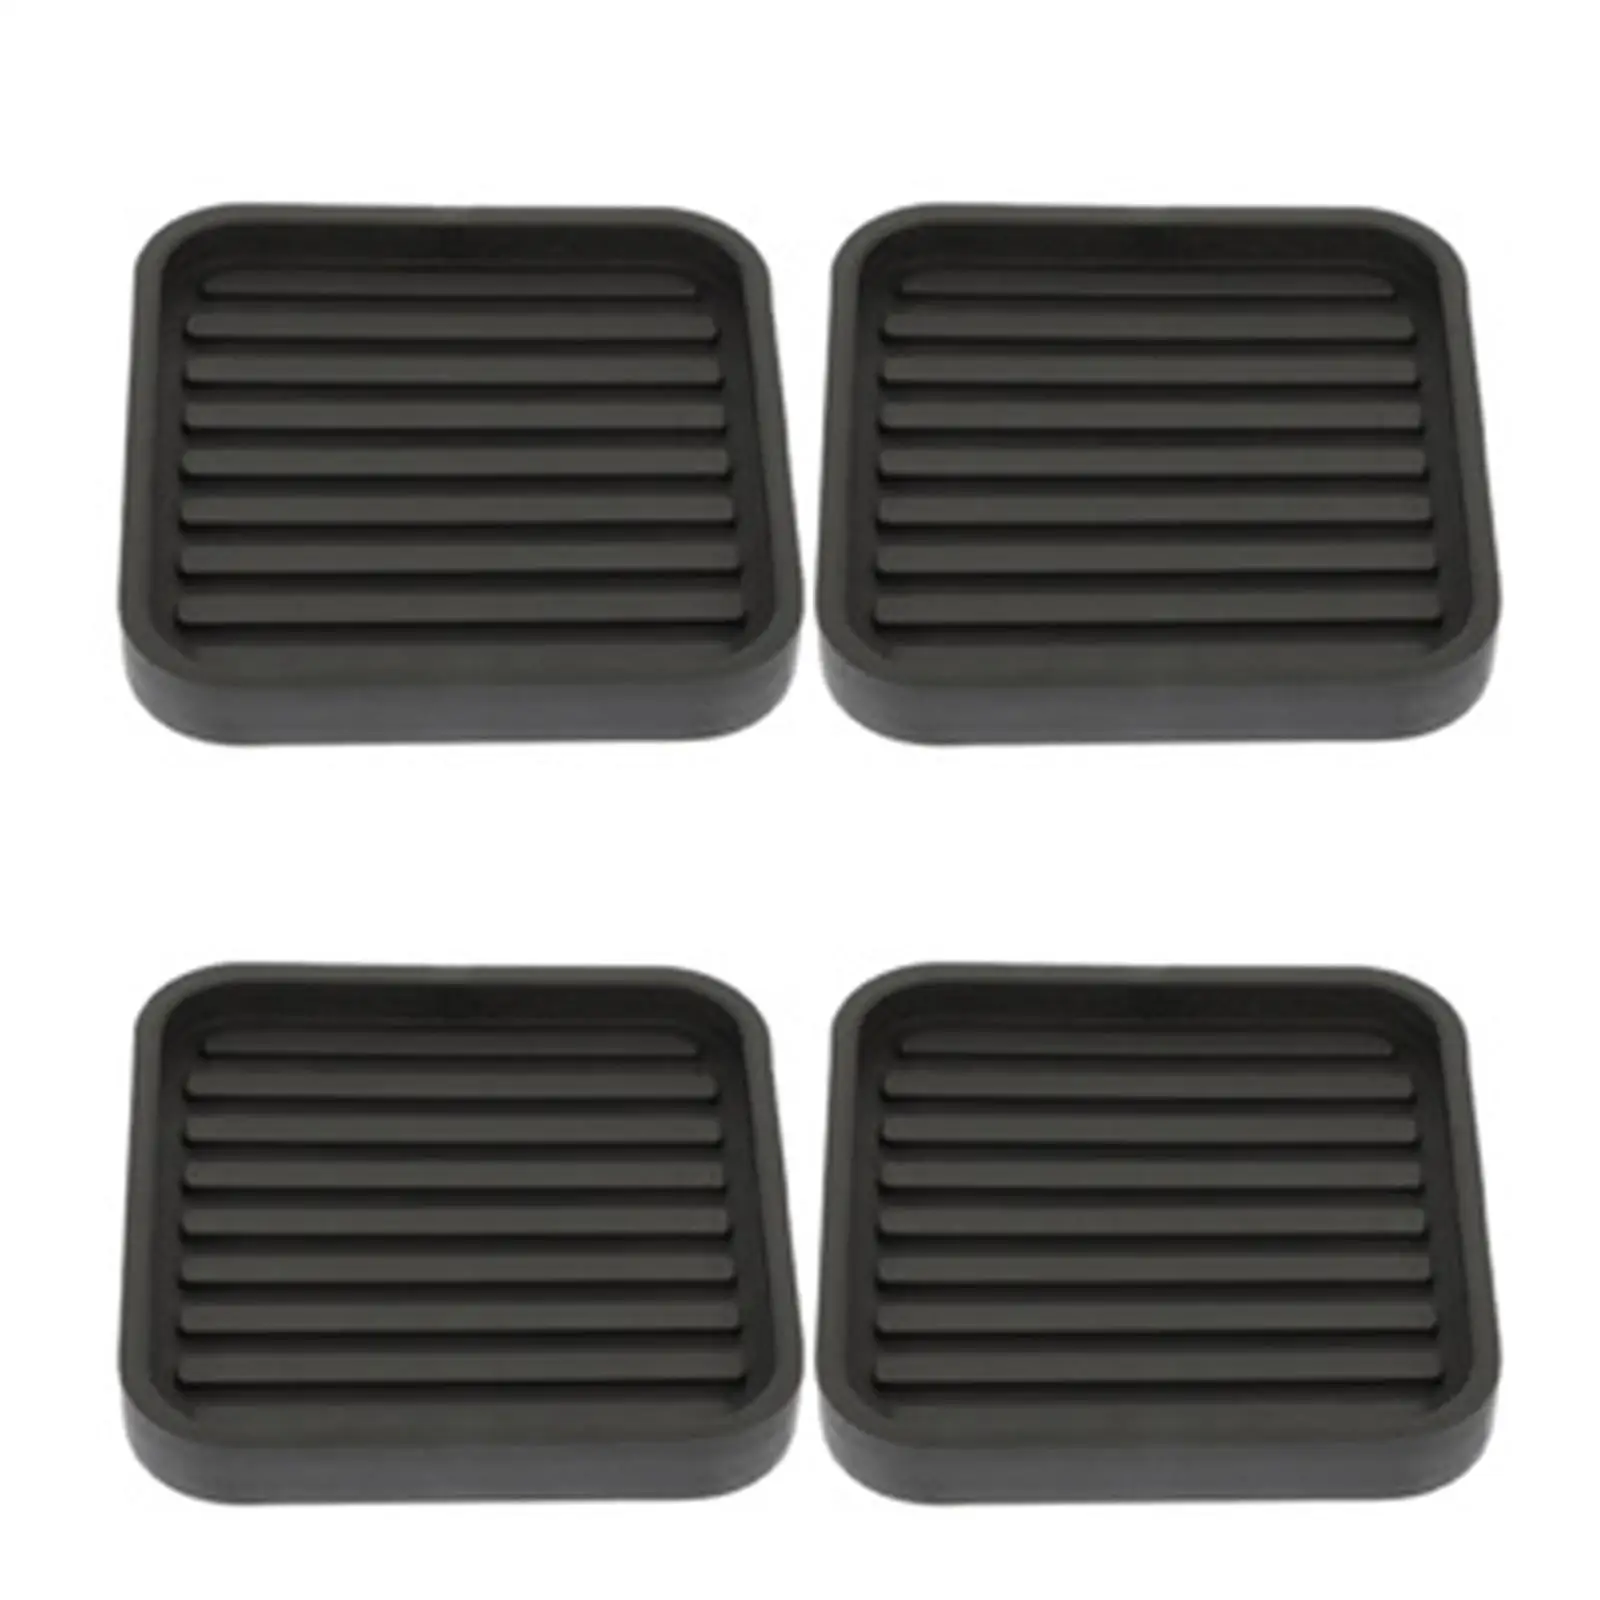 4 Pieces Furniture Cups Caster Bed Stopper Floor Protectors Noise Reducing Square Rubber Furniture Caster Cups for Chairs Sofas